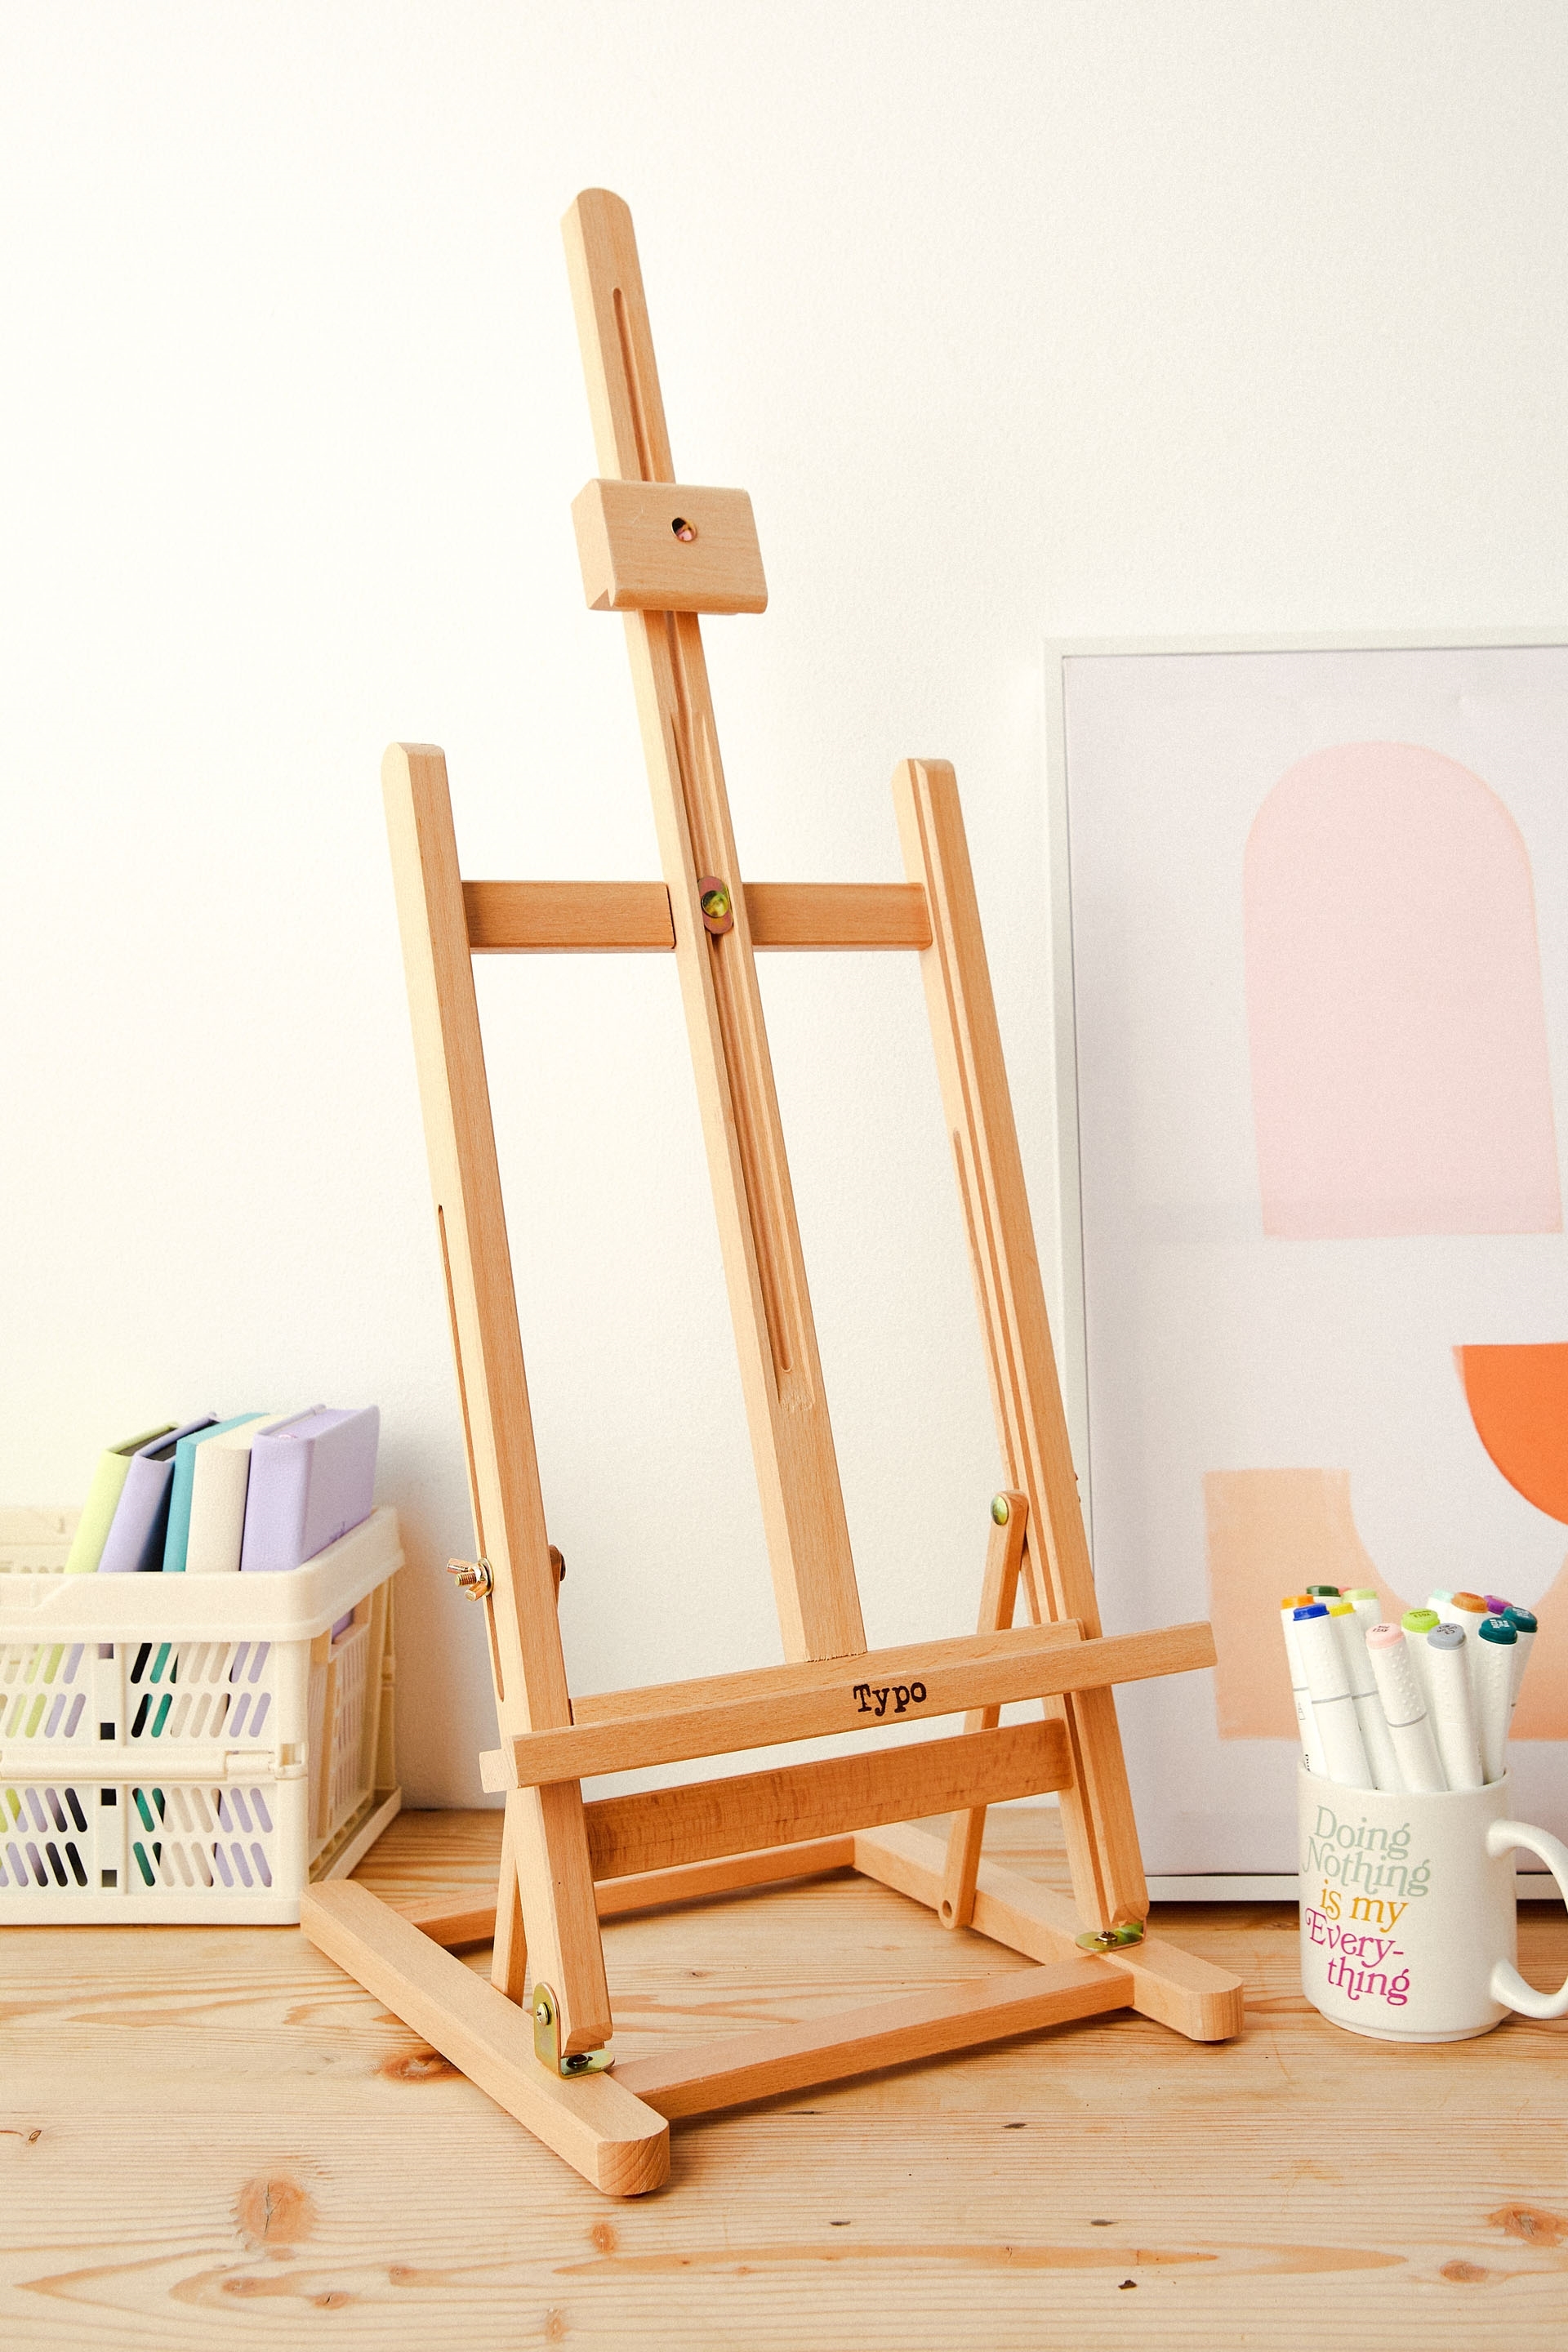 Typo - Large Easel - Wood